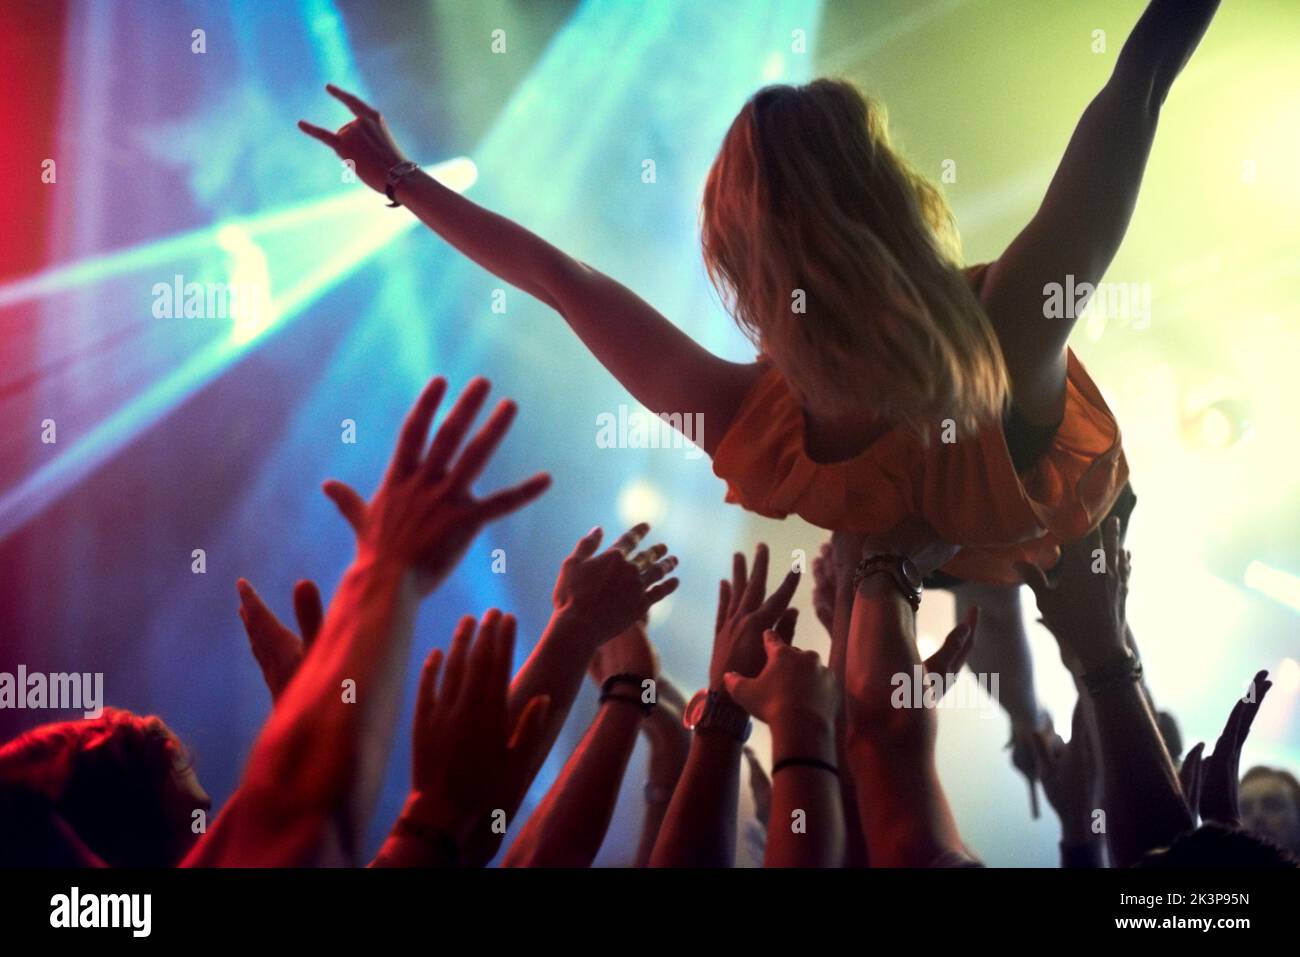 Crowd surfing. A young girl crowd surfing as a band plays one of her favourite songs. Stock Photo